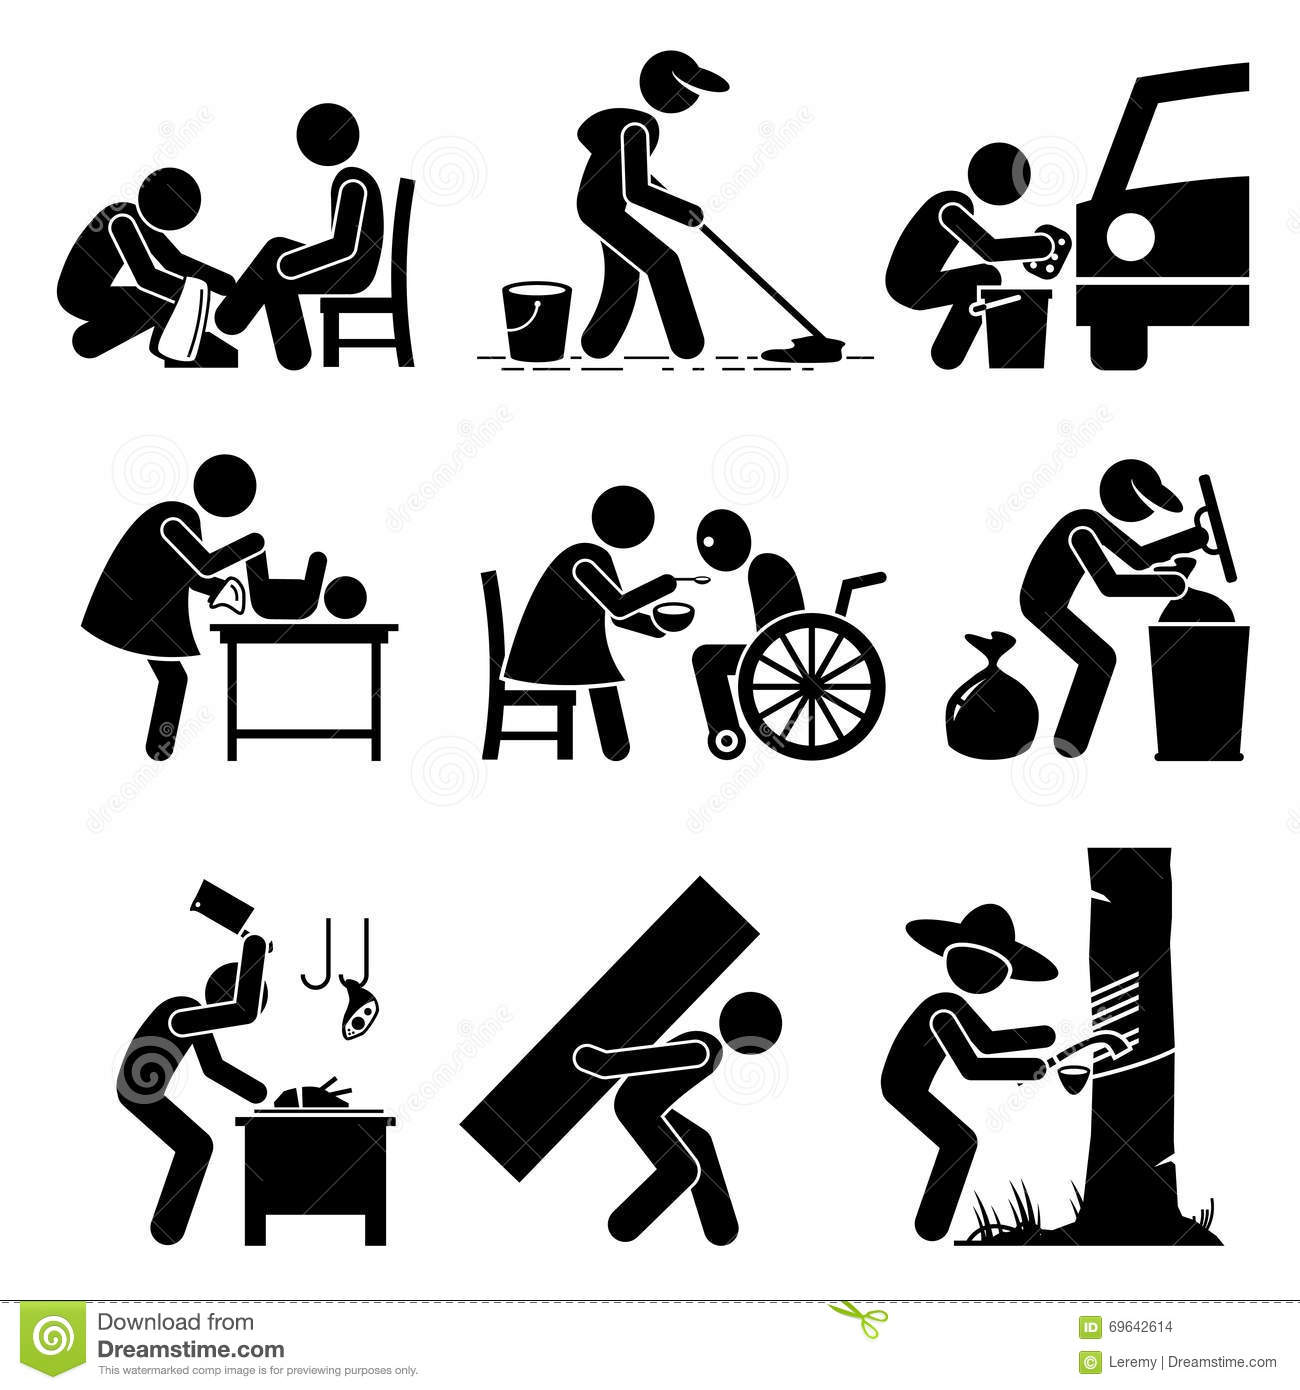 clipart for jobs - photo #23